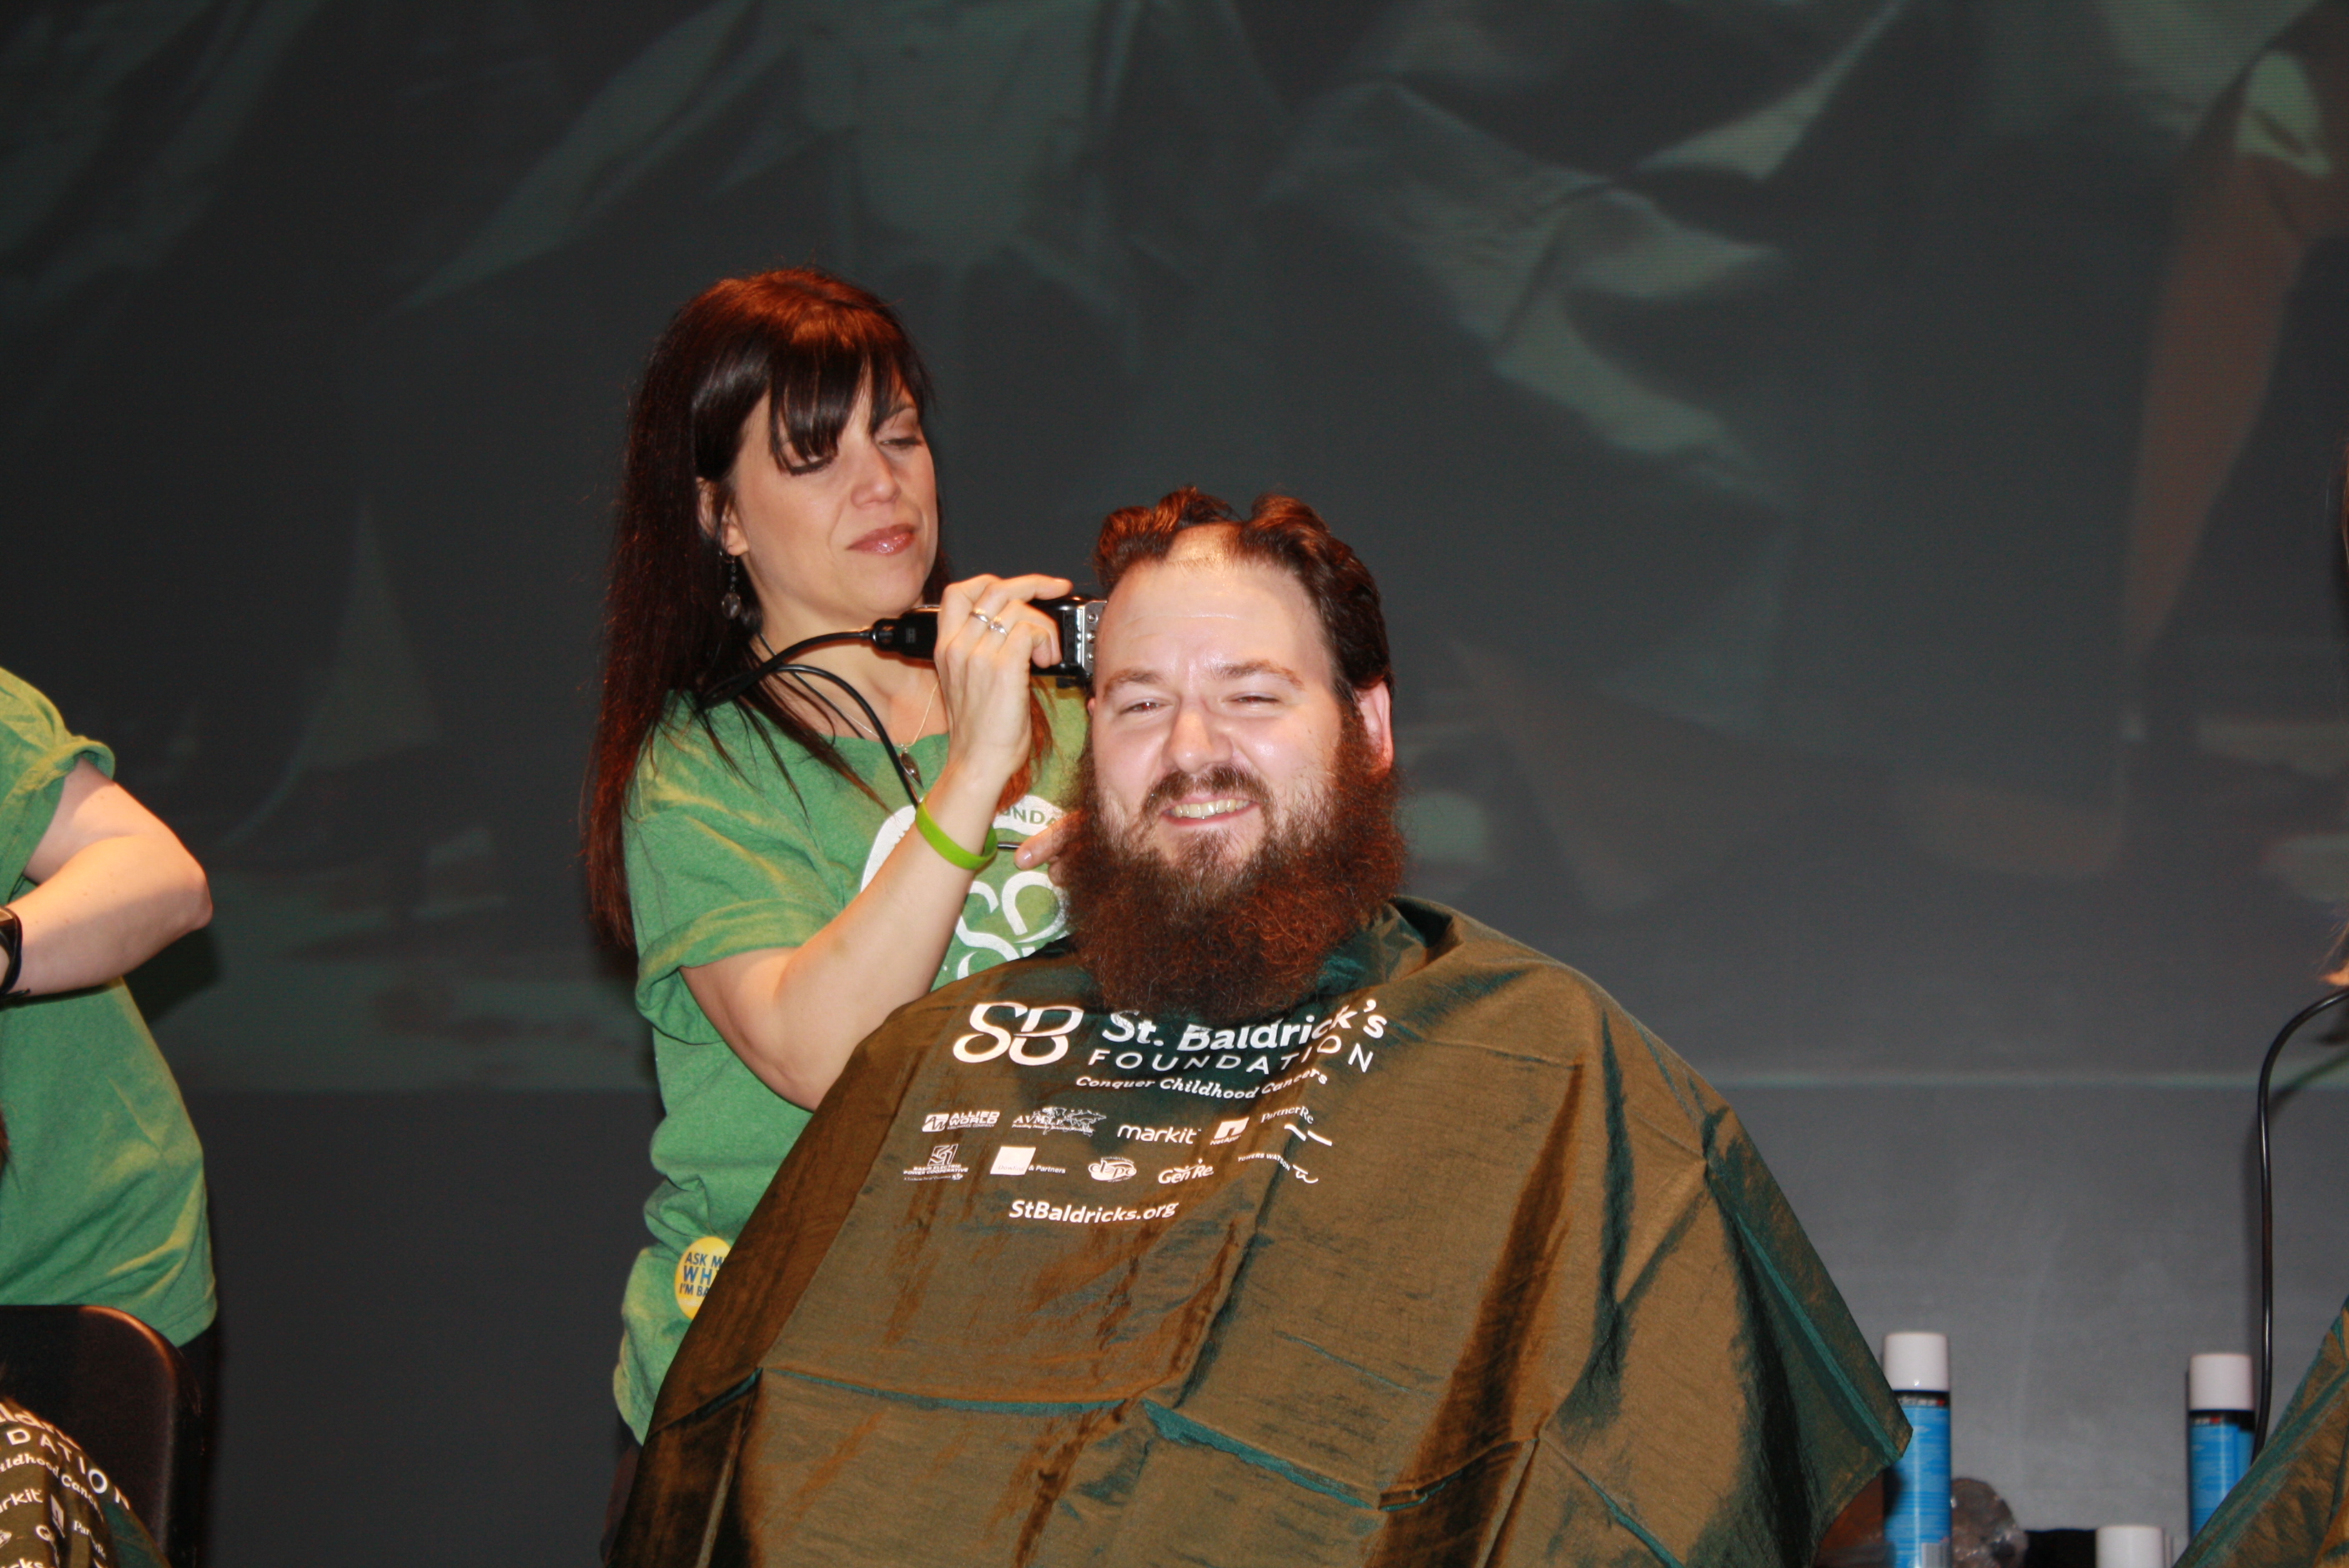 Say goodbye to the beard and the hair! University School parent Ross Duncan does his part for childhood cancer research.